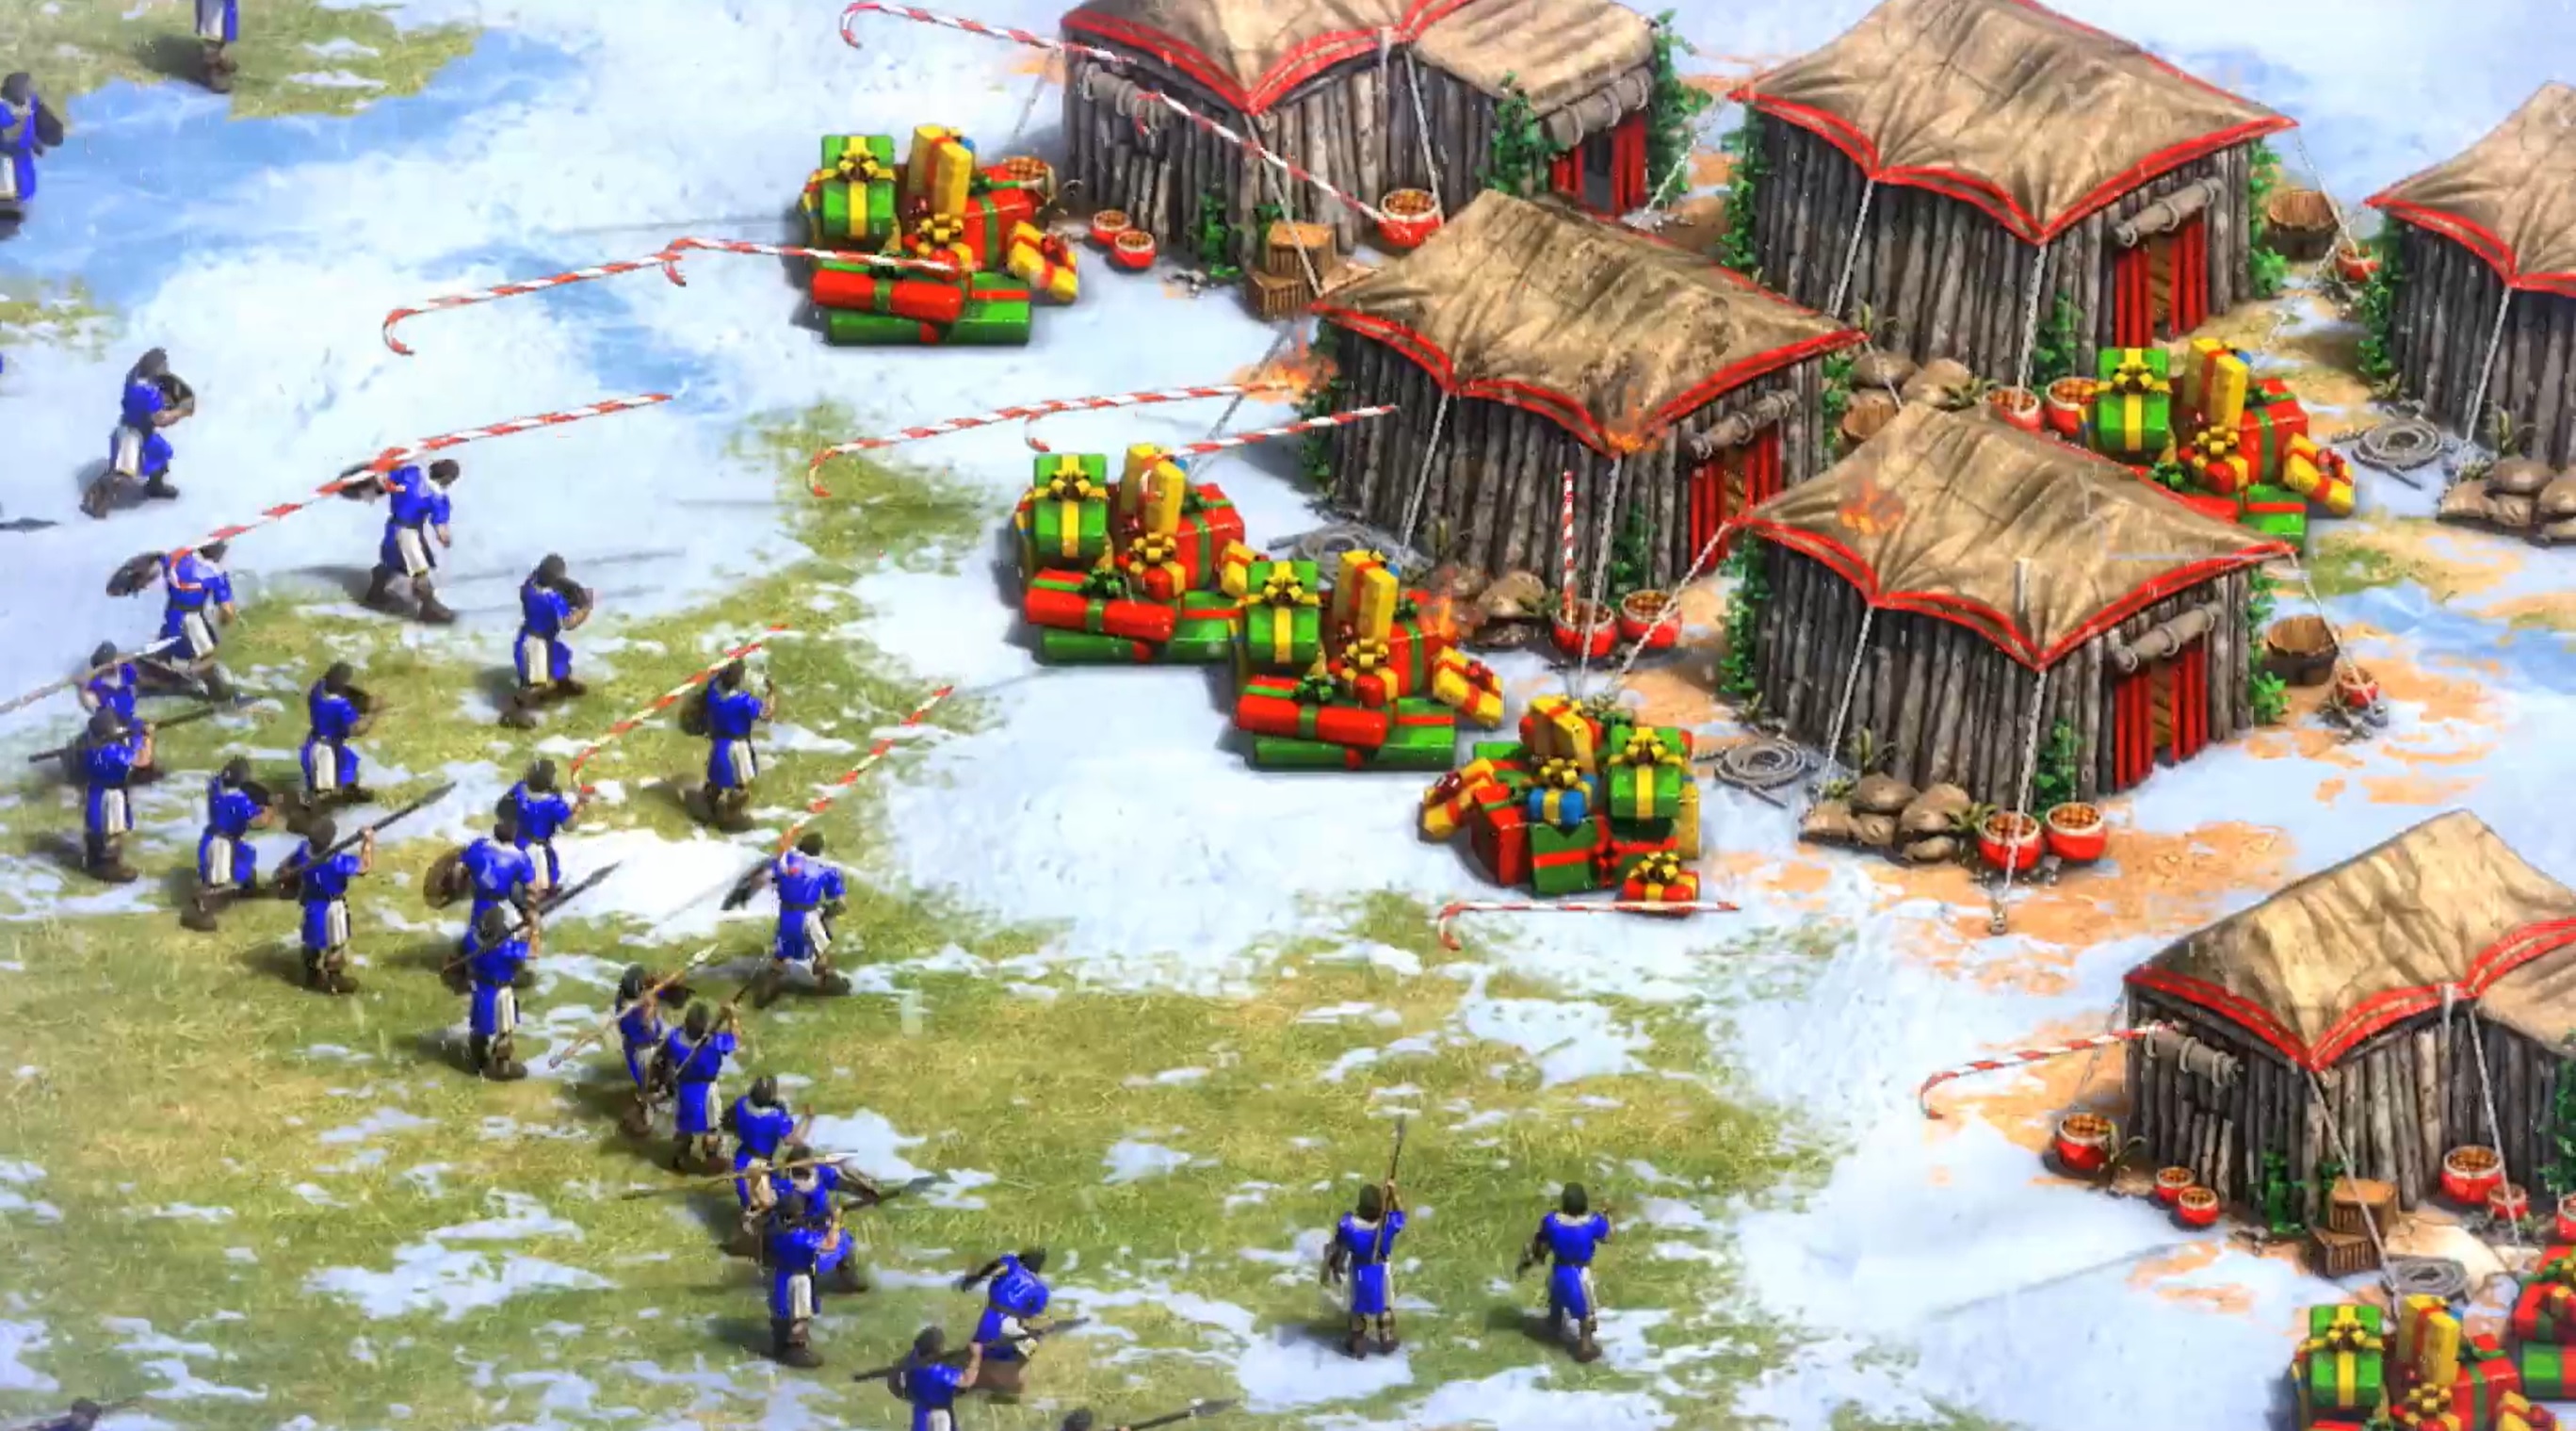 age of empires hd mods